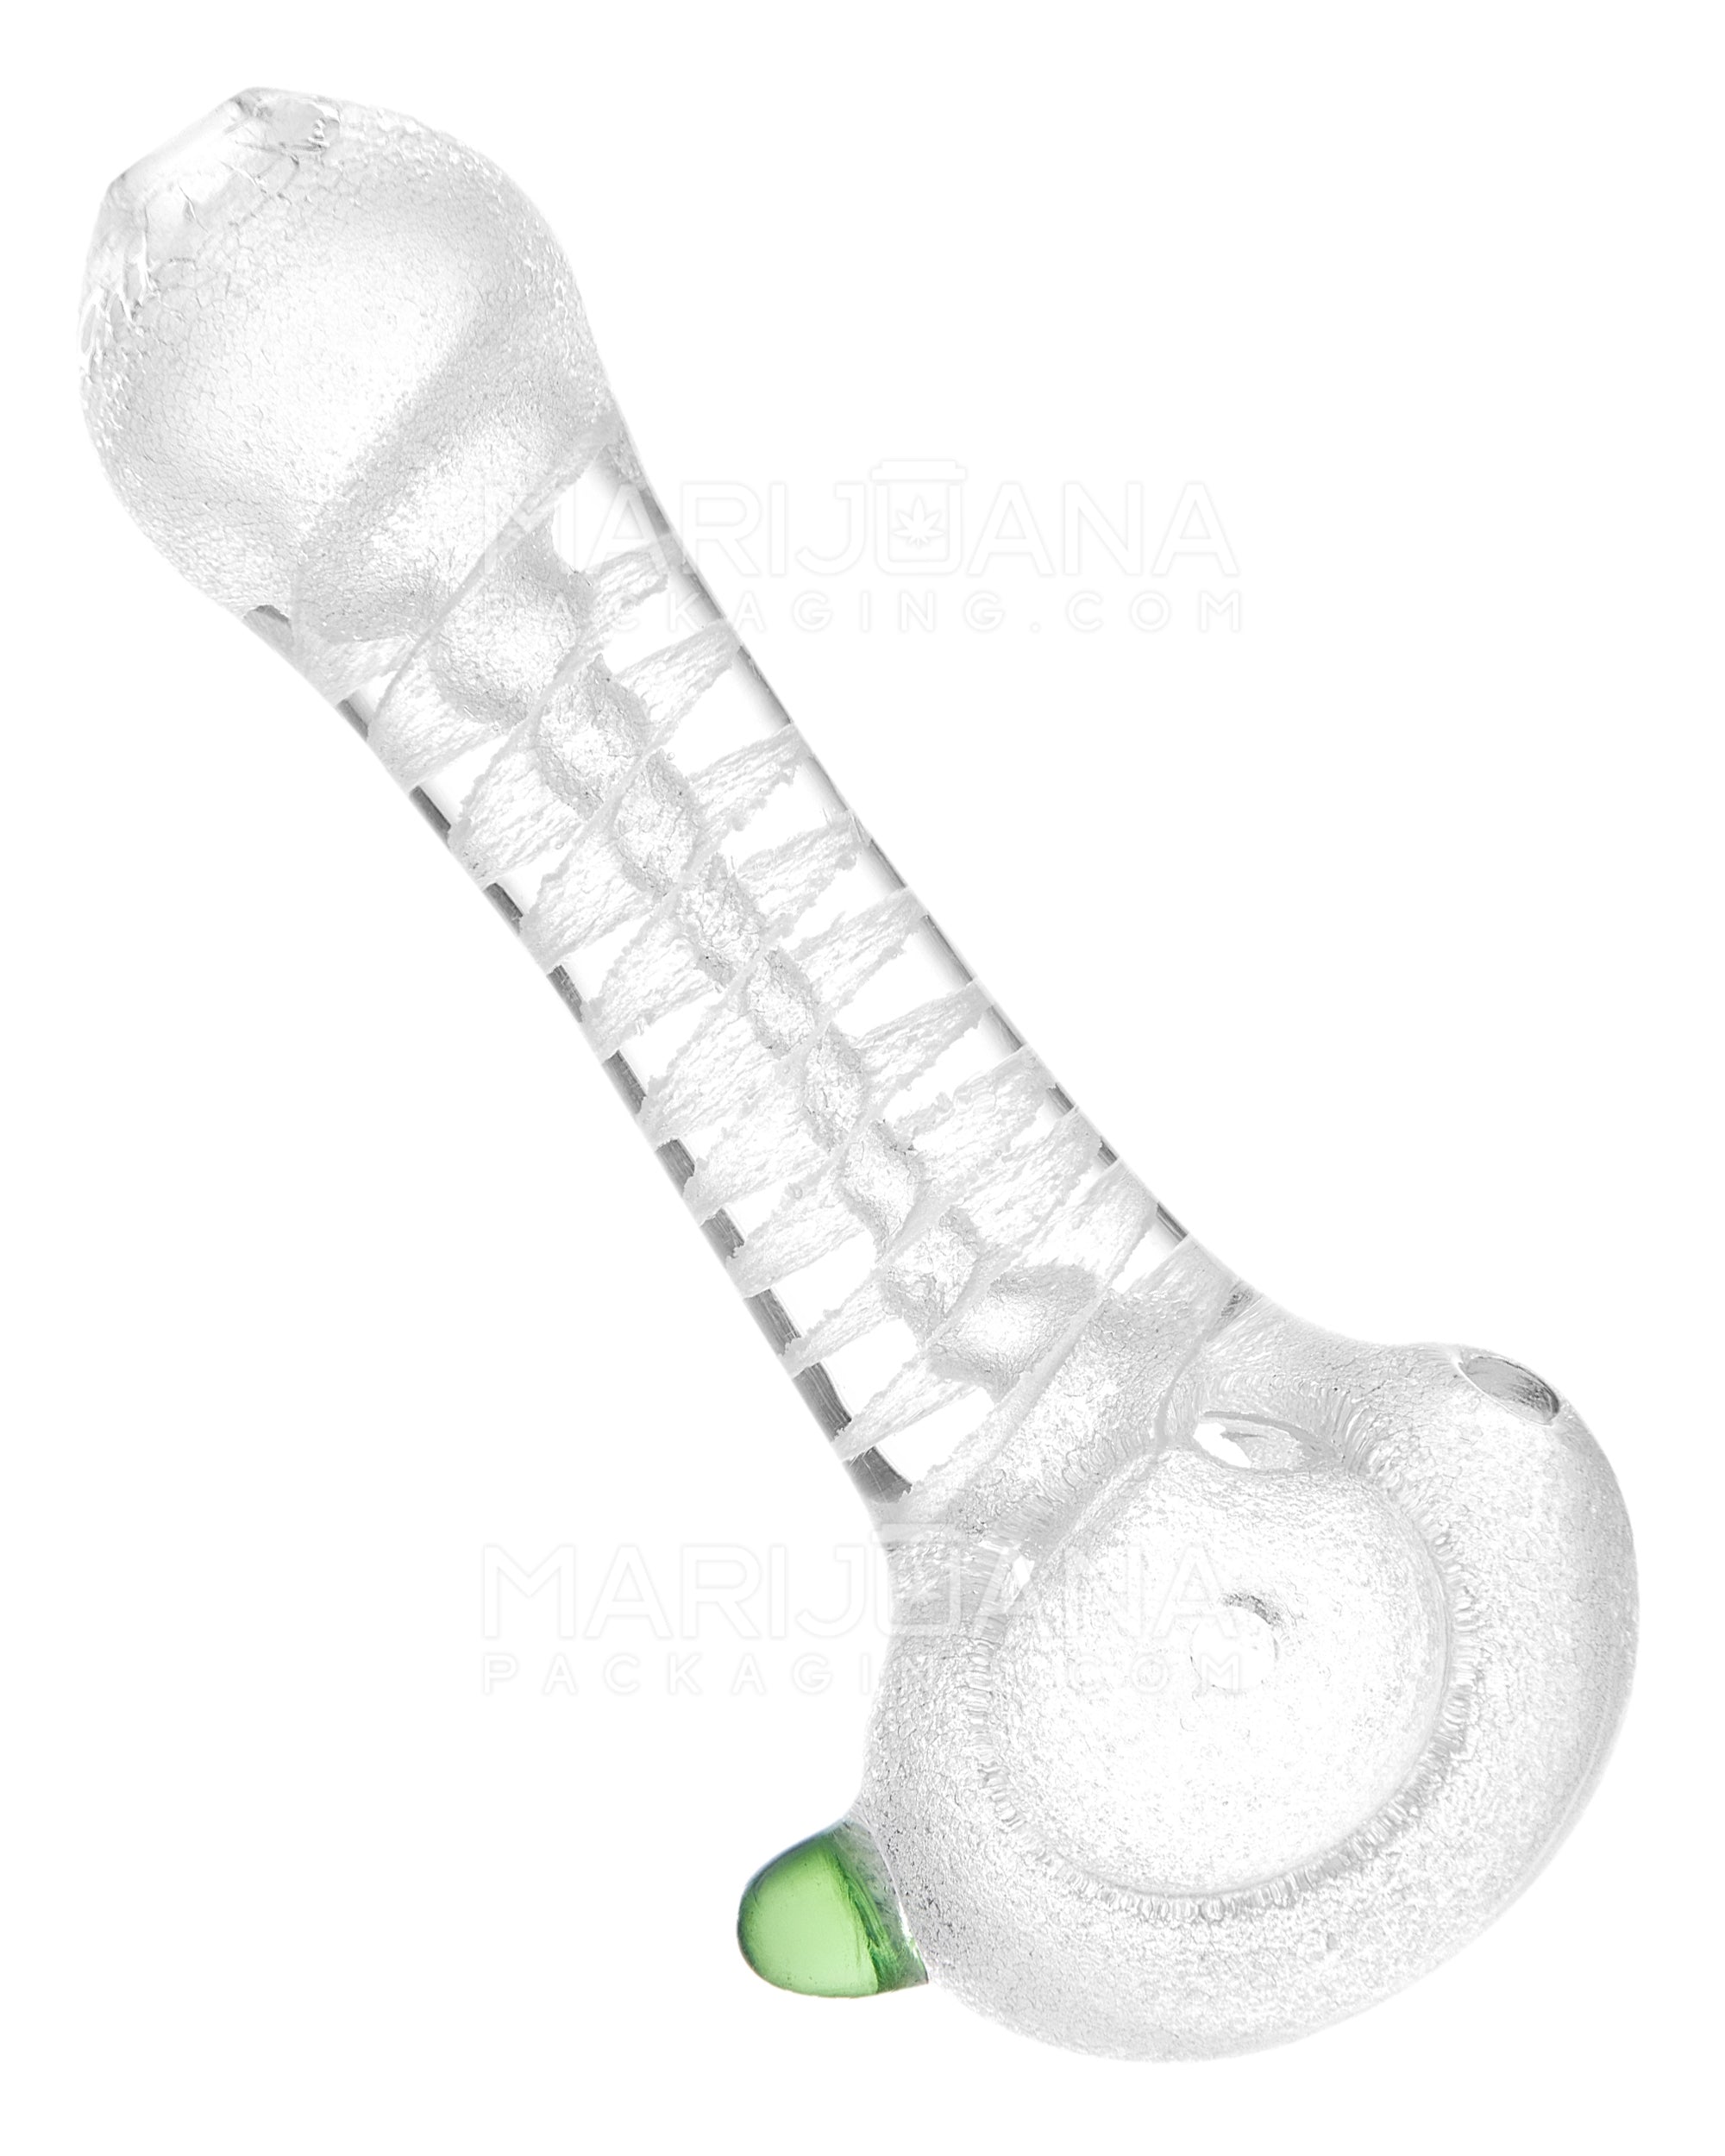 Glow-in-the-Dark | Spiral Spoon Hand Pipe | 4in Long - Glass - White - 1